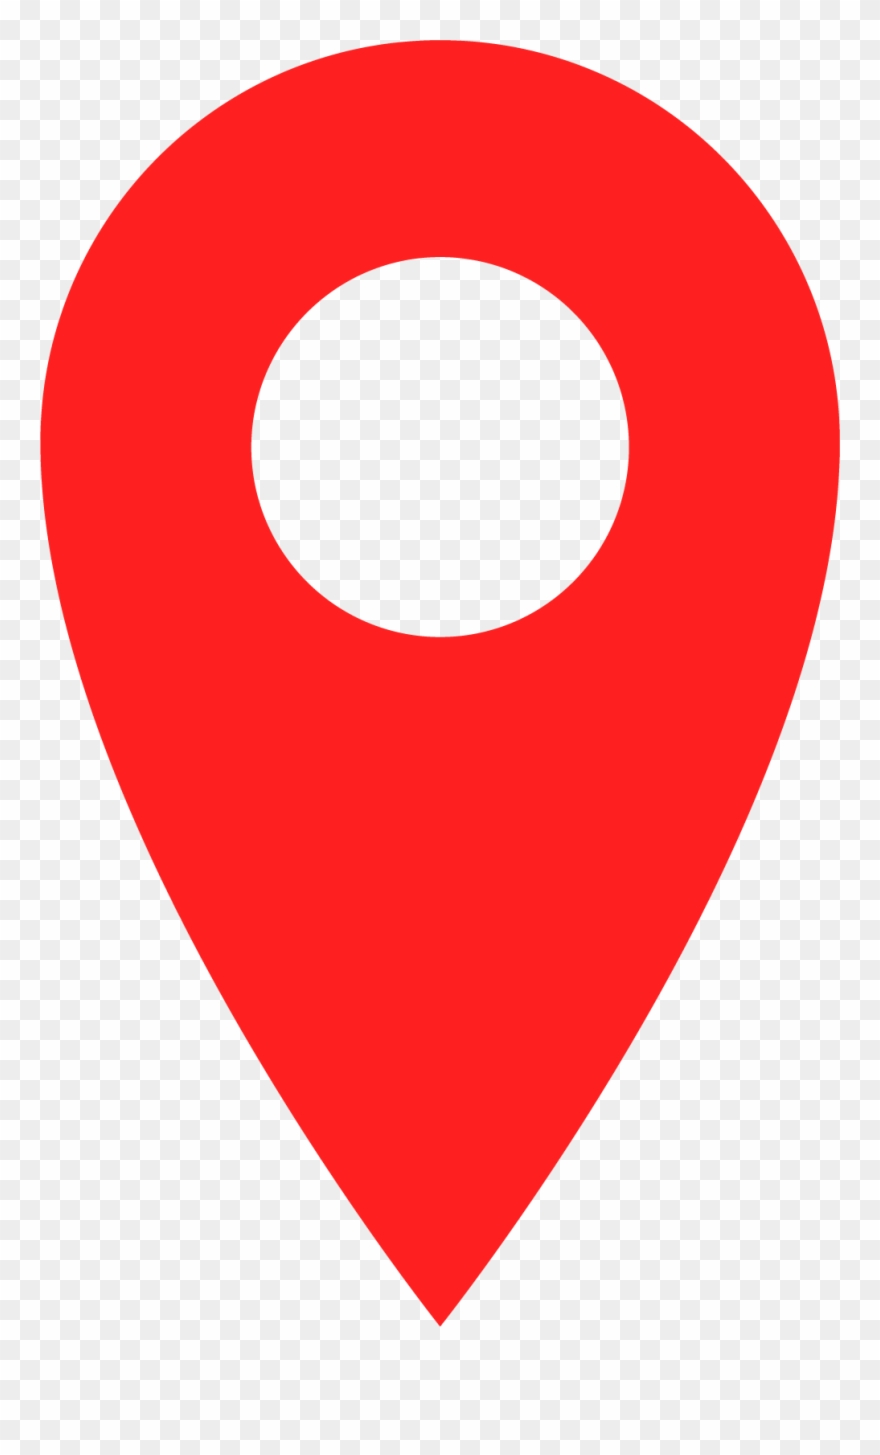 Gps png clipart.